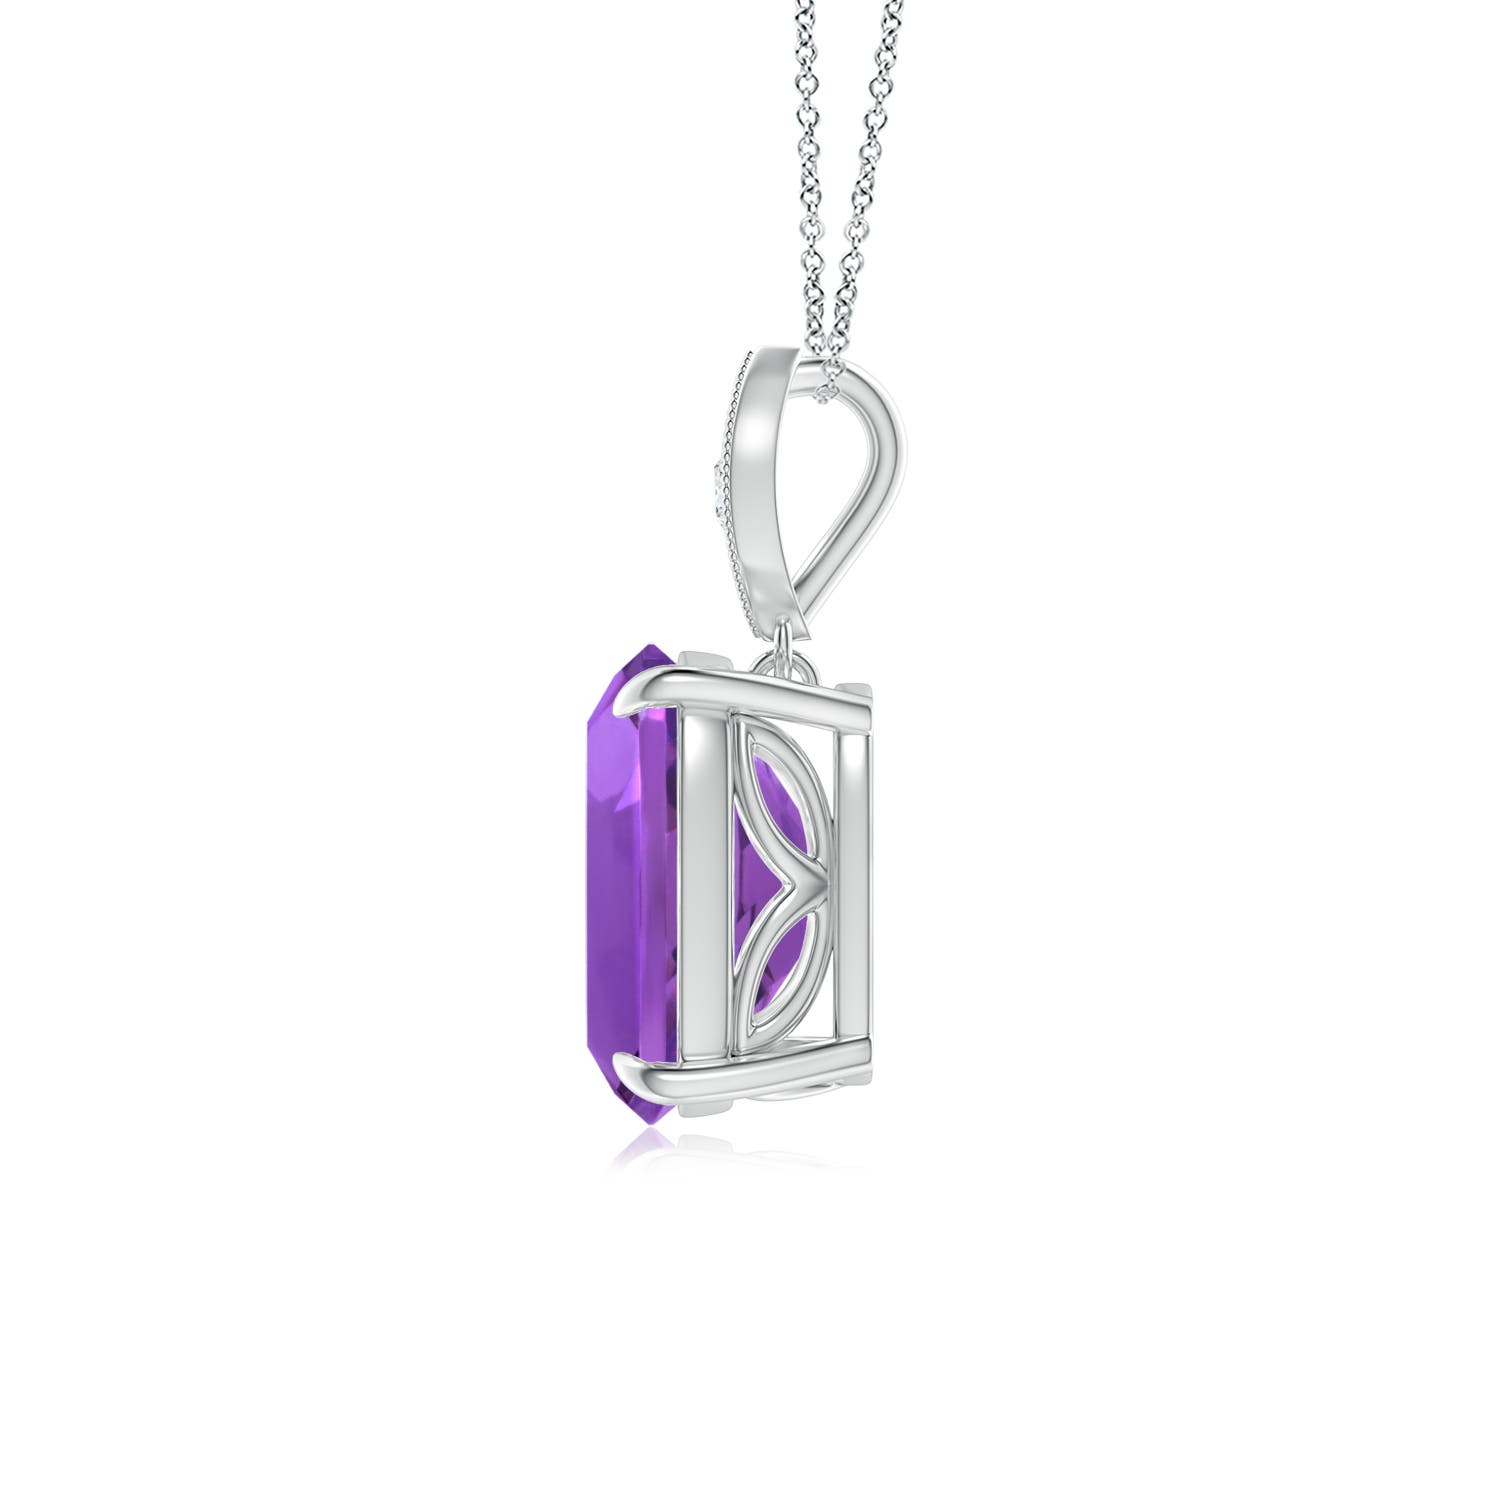 AAA - Amethyst / 2.03 CT / 14 KT White Gold